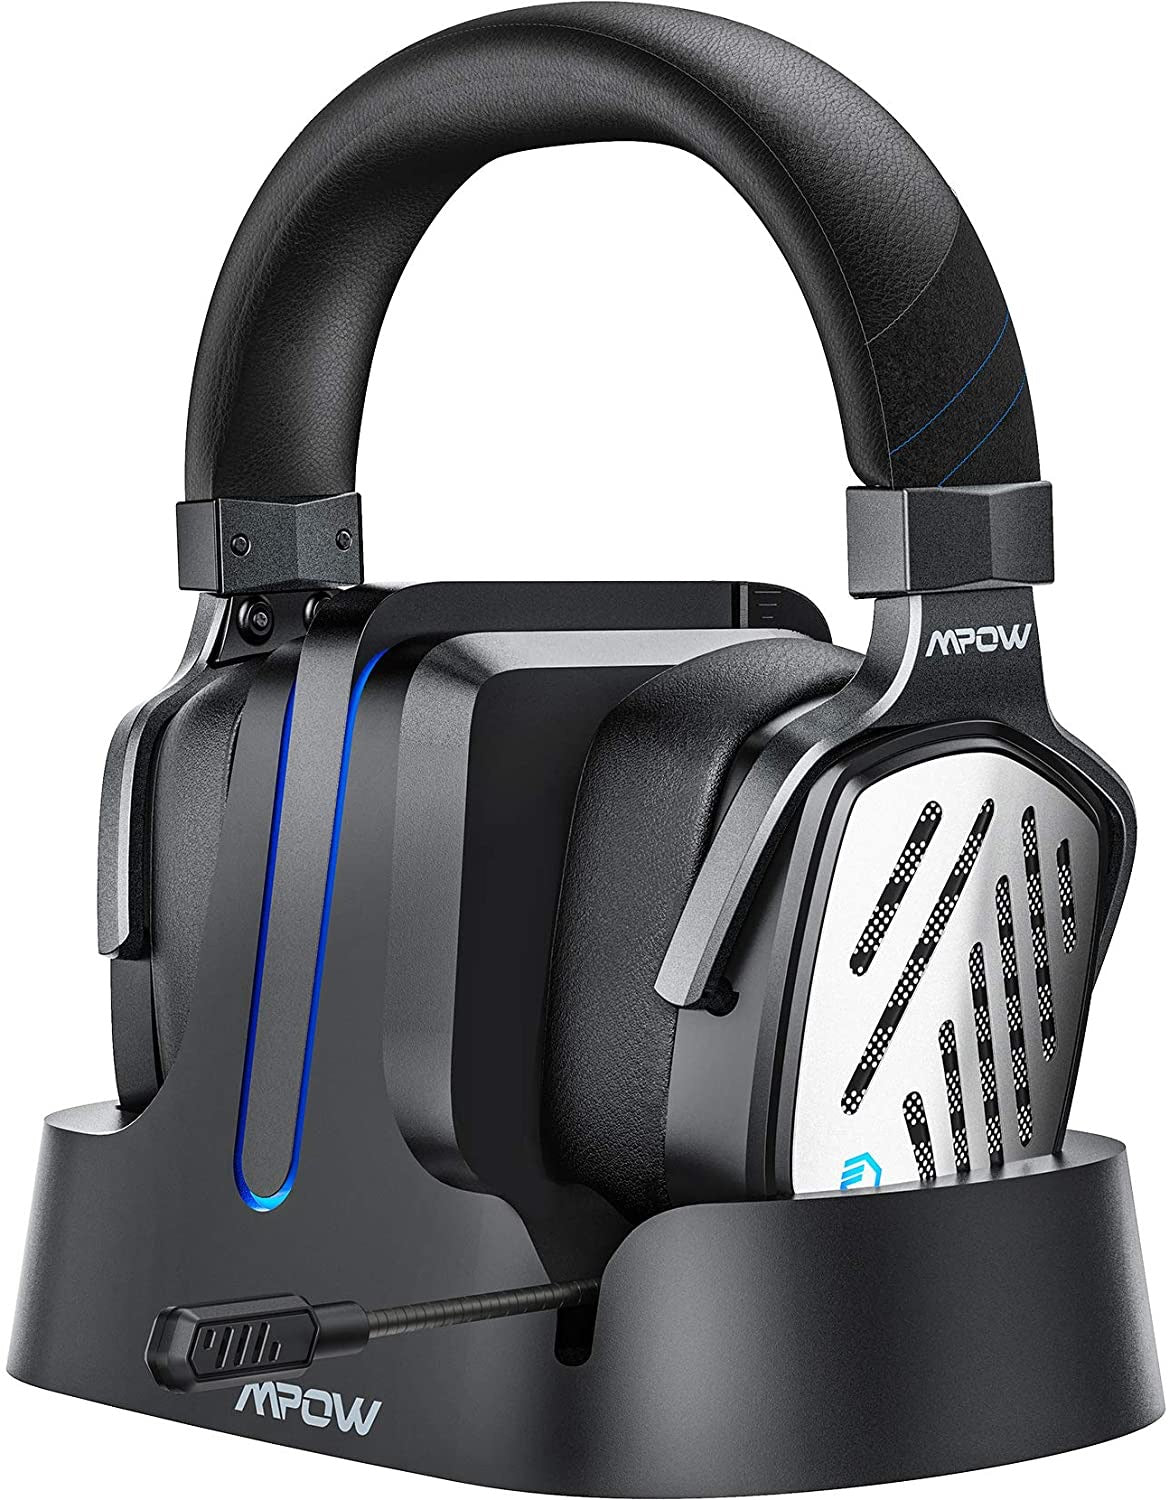 Wireless Gaming Headset with charging station and signal transmitter Mpow BH455 T1 2.4GHz